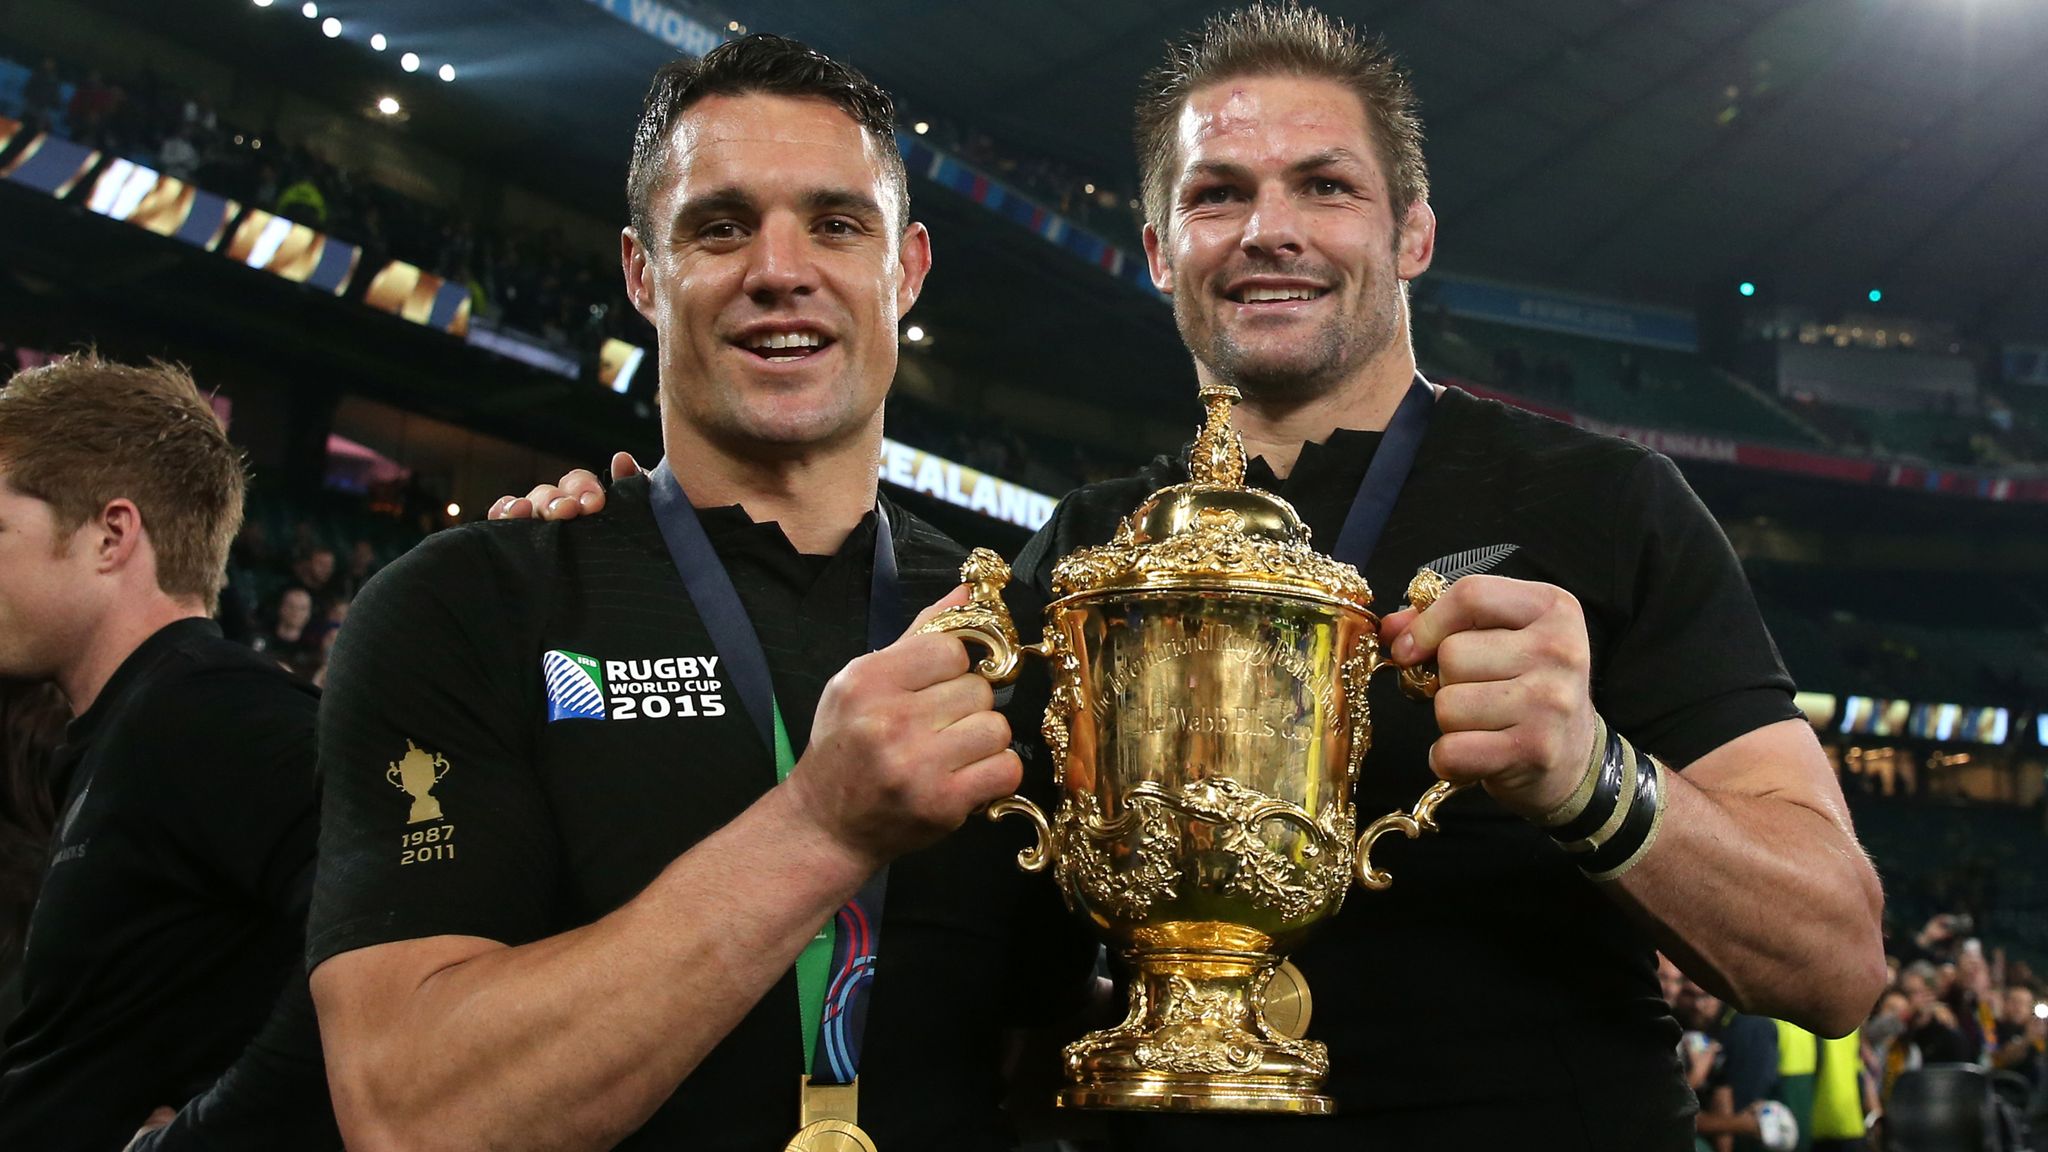 Dan Carter - Always looked up to this legend of the game. Would of